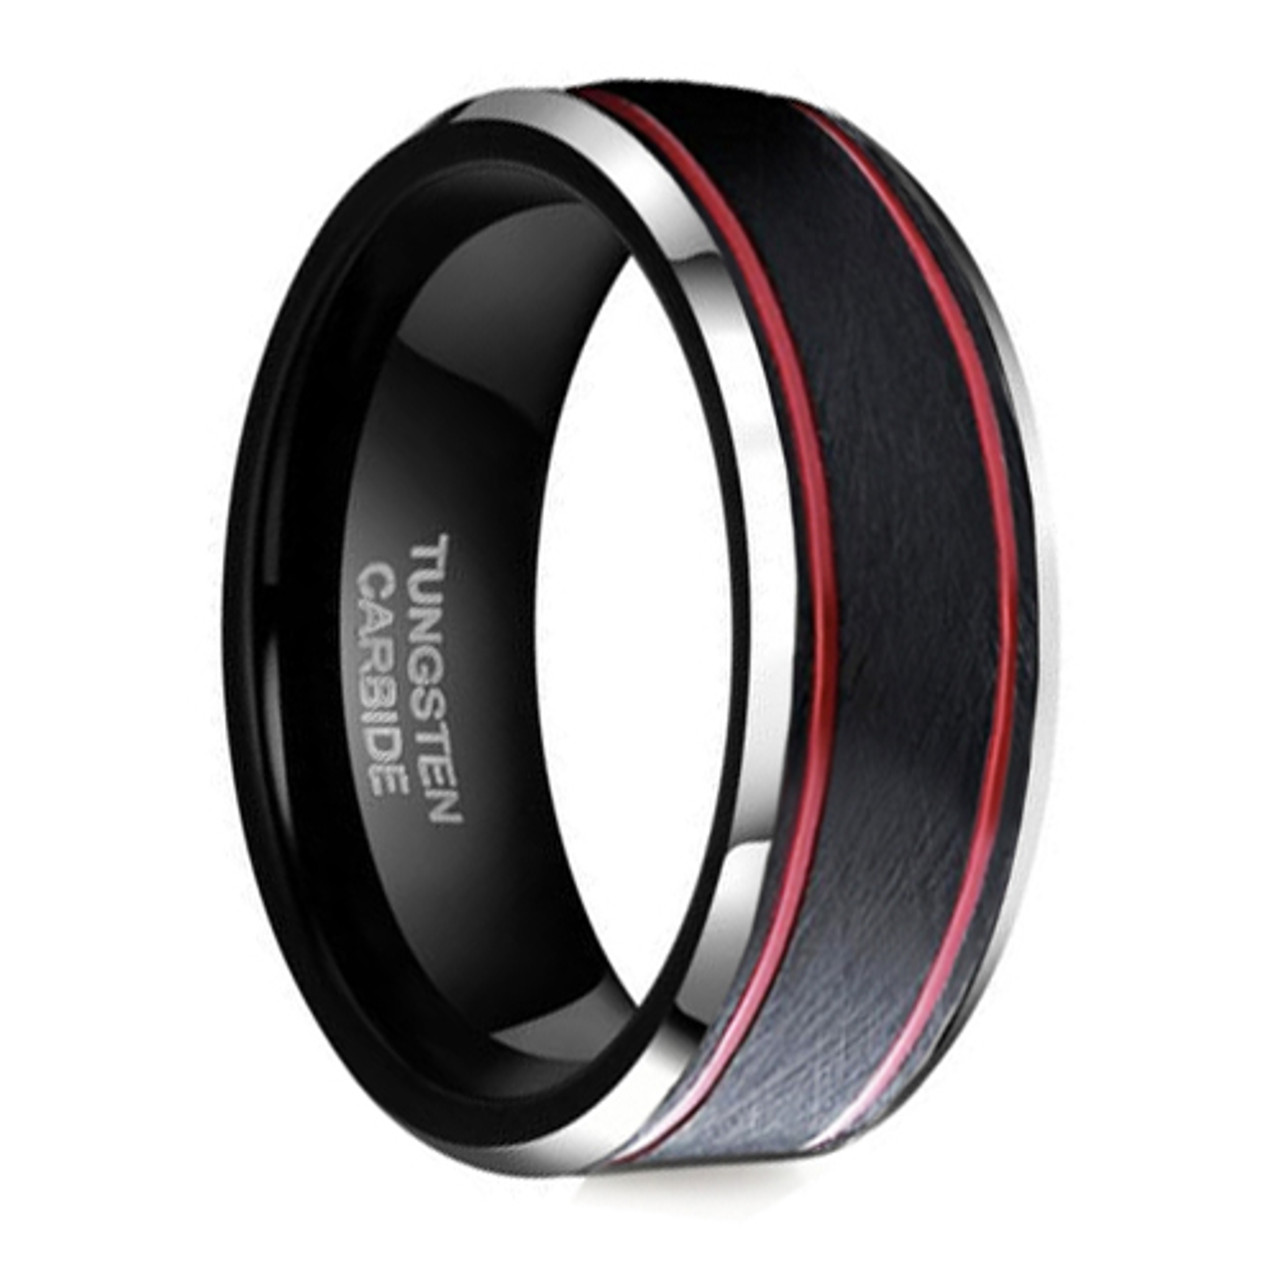 (8mm) Unisex or Men's Tungsten Carbide Wedding Ring Band. Black Matte Top with Two Red Stripes and Beveled Edges.